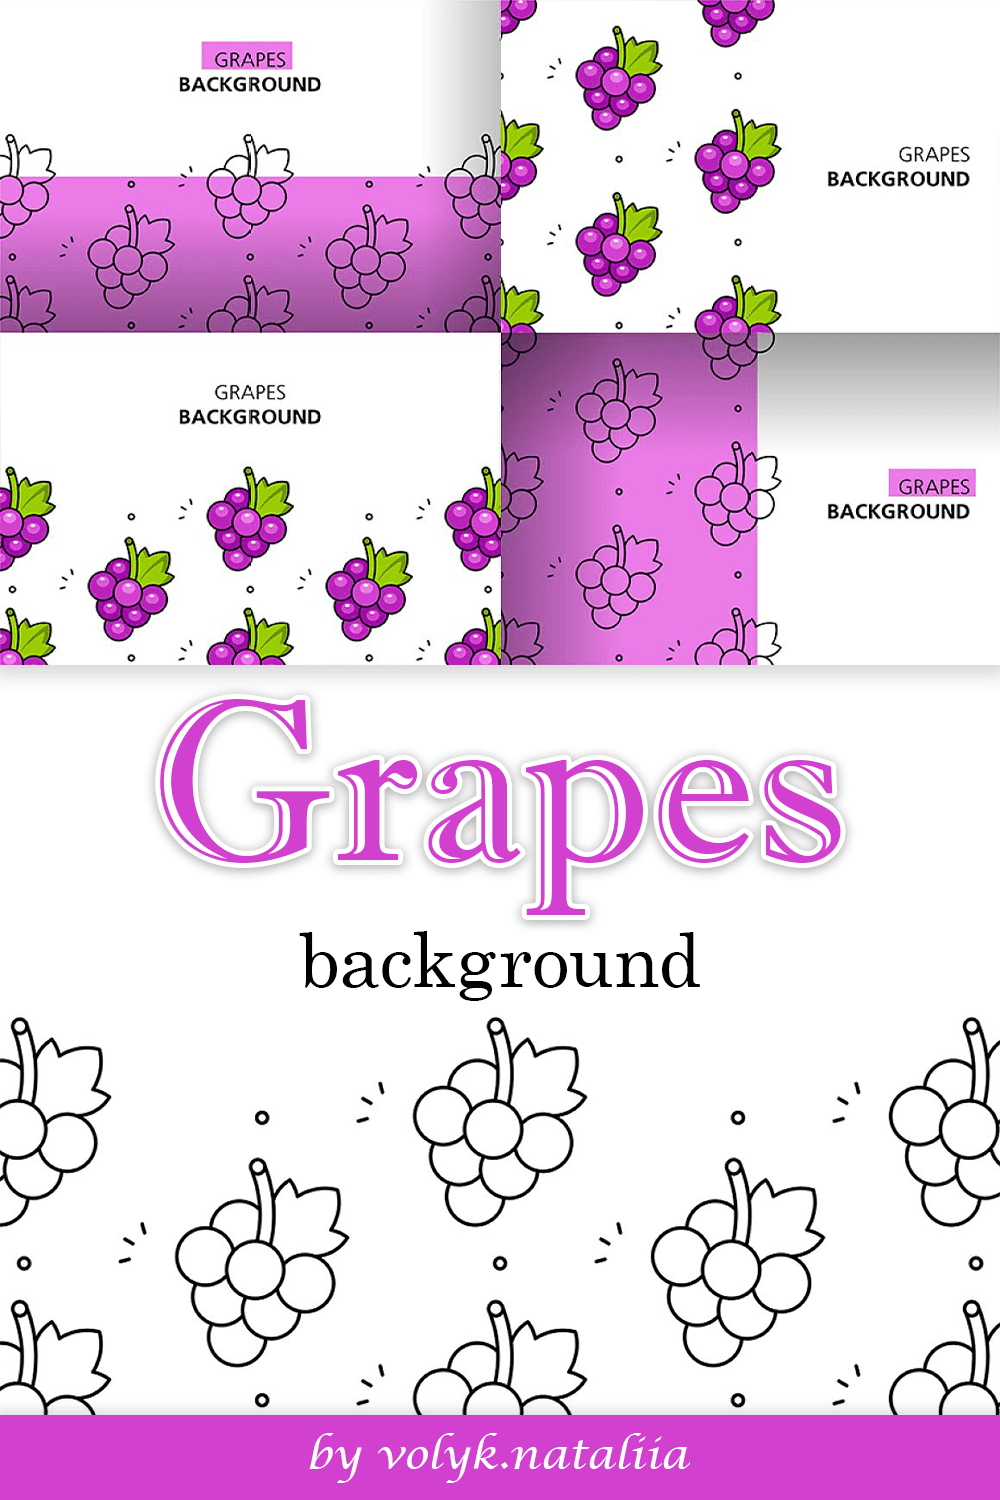 Grapes background - pinterest image preview.